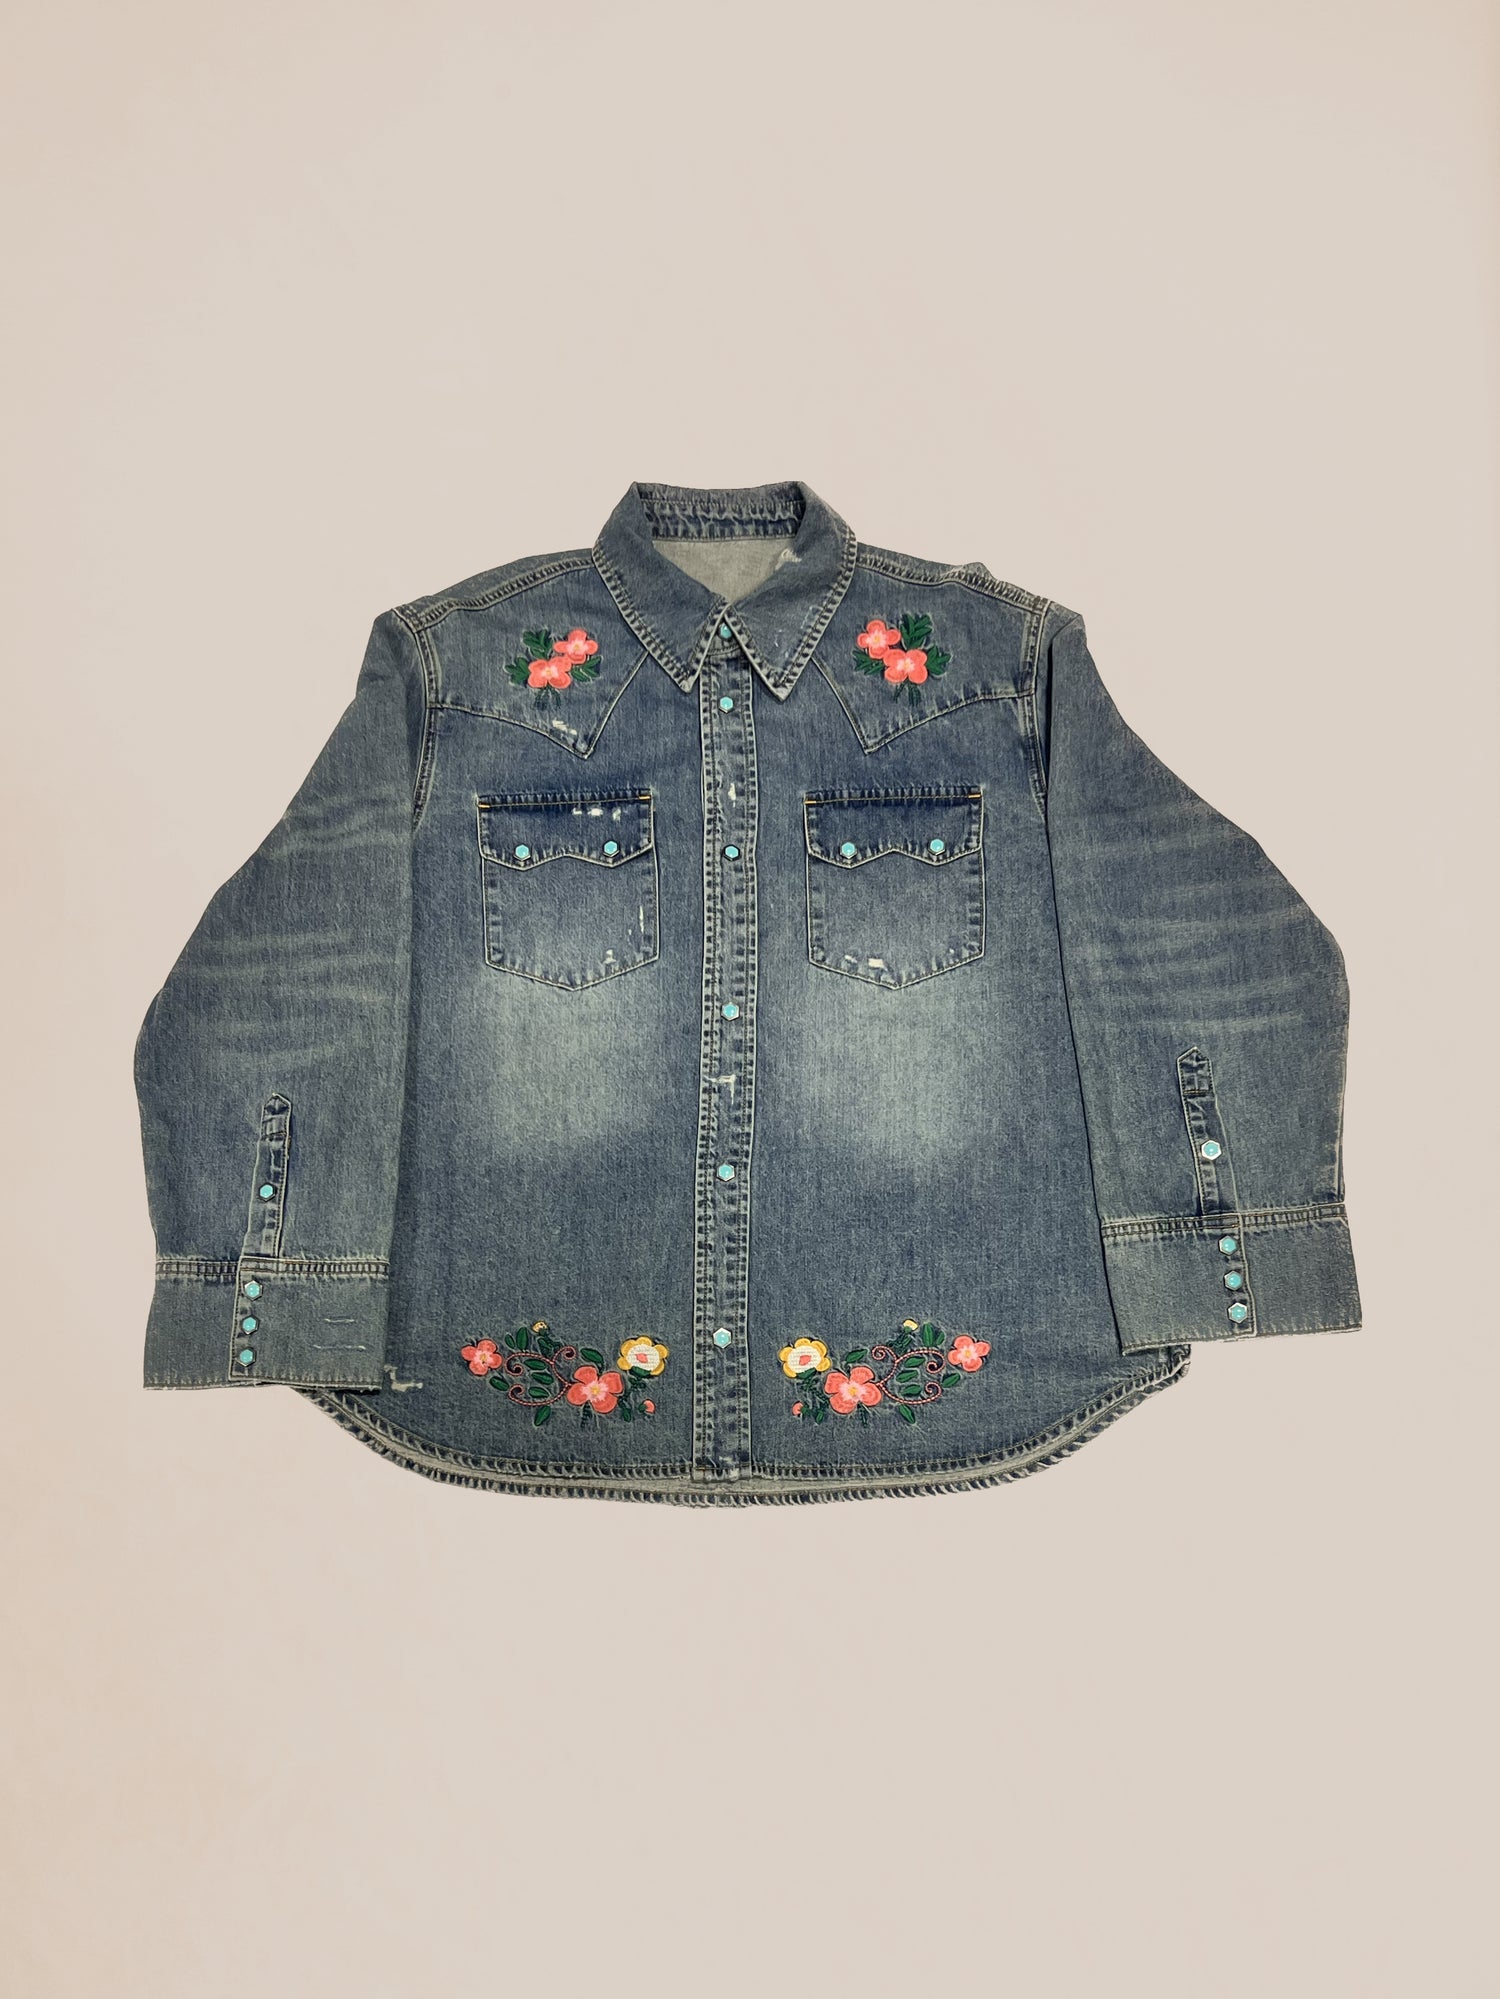 Denim jacket with Profound's Sample 17 Floral Embroidered Western Shirt design on a pale background.